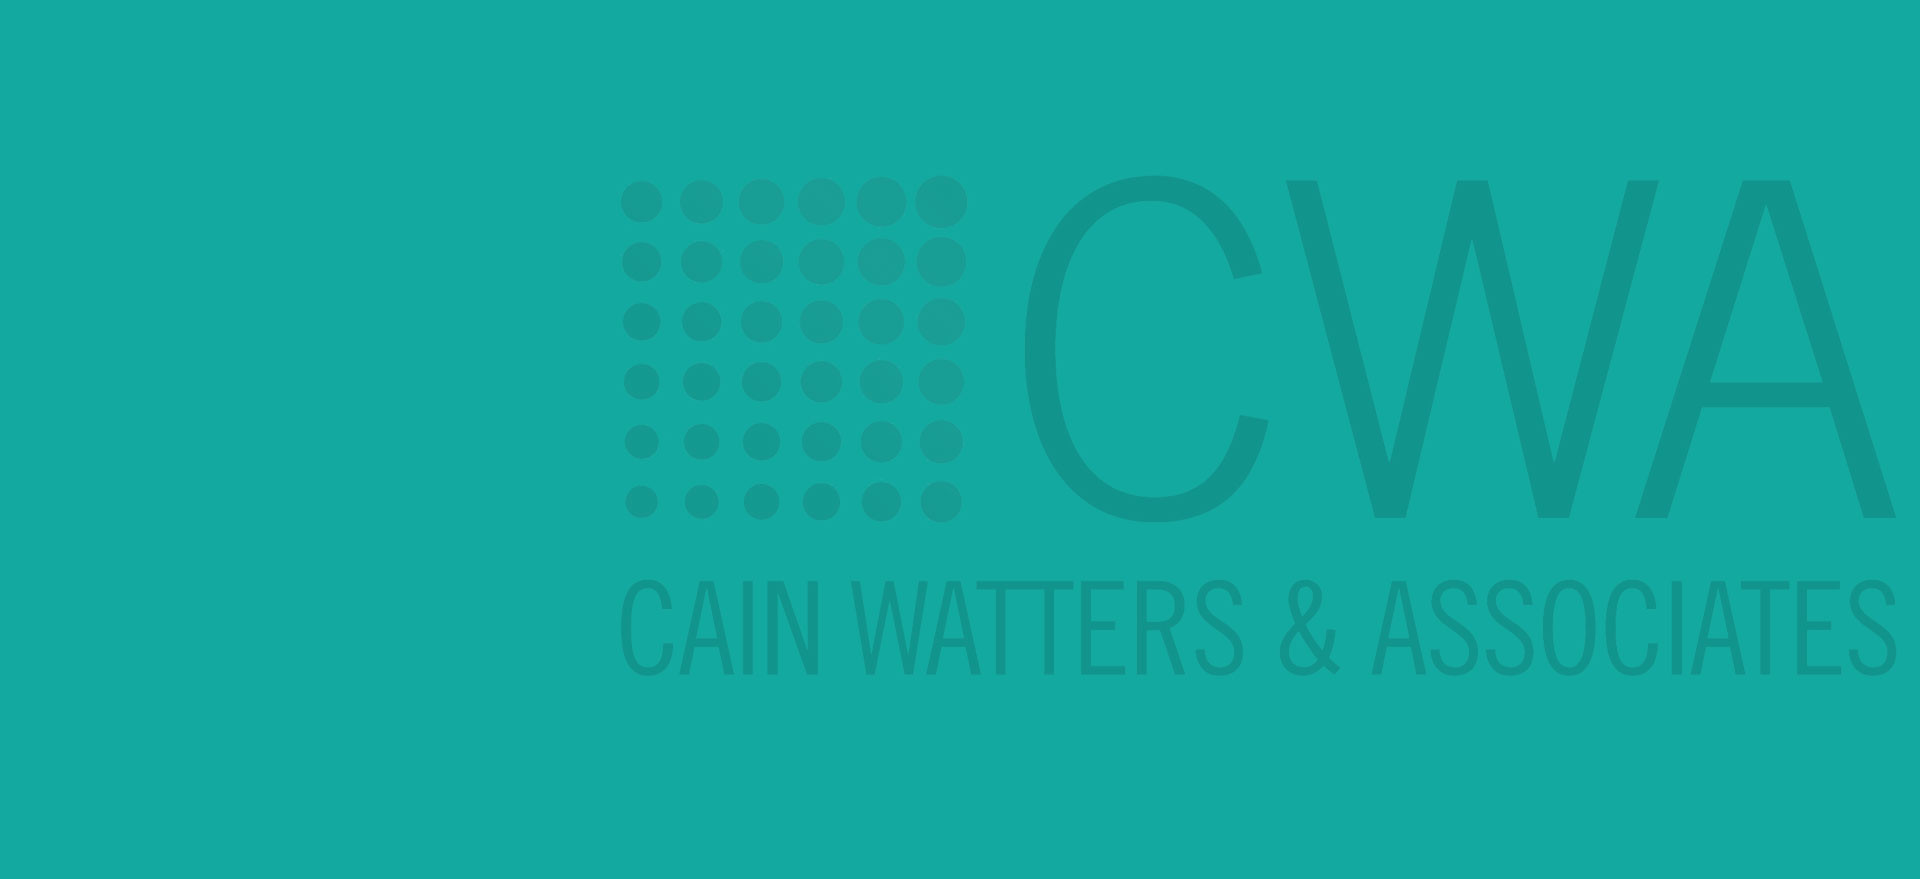 cain-watters-header-graphic